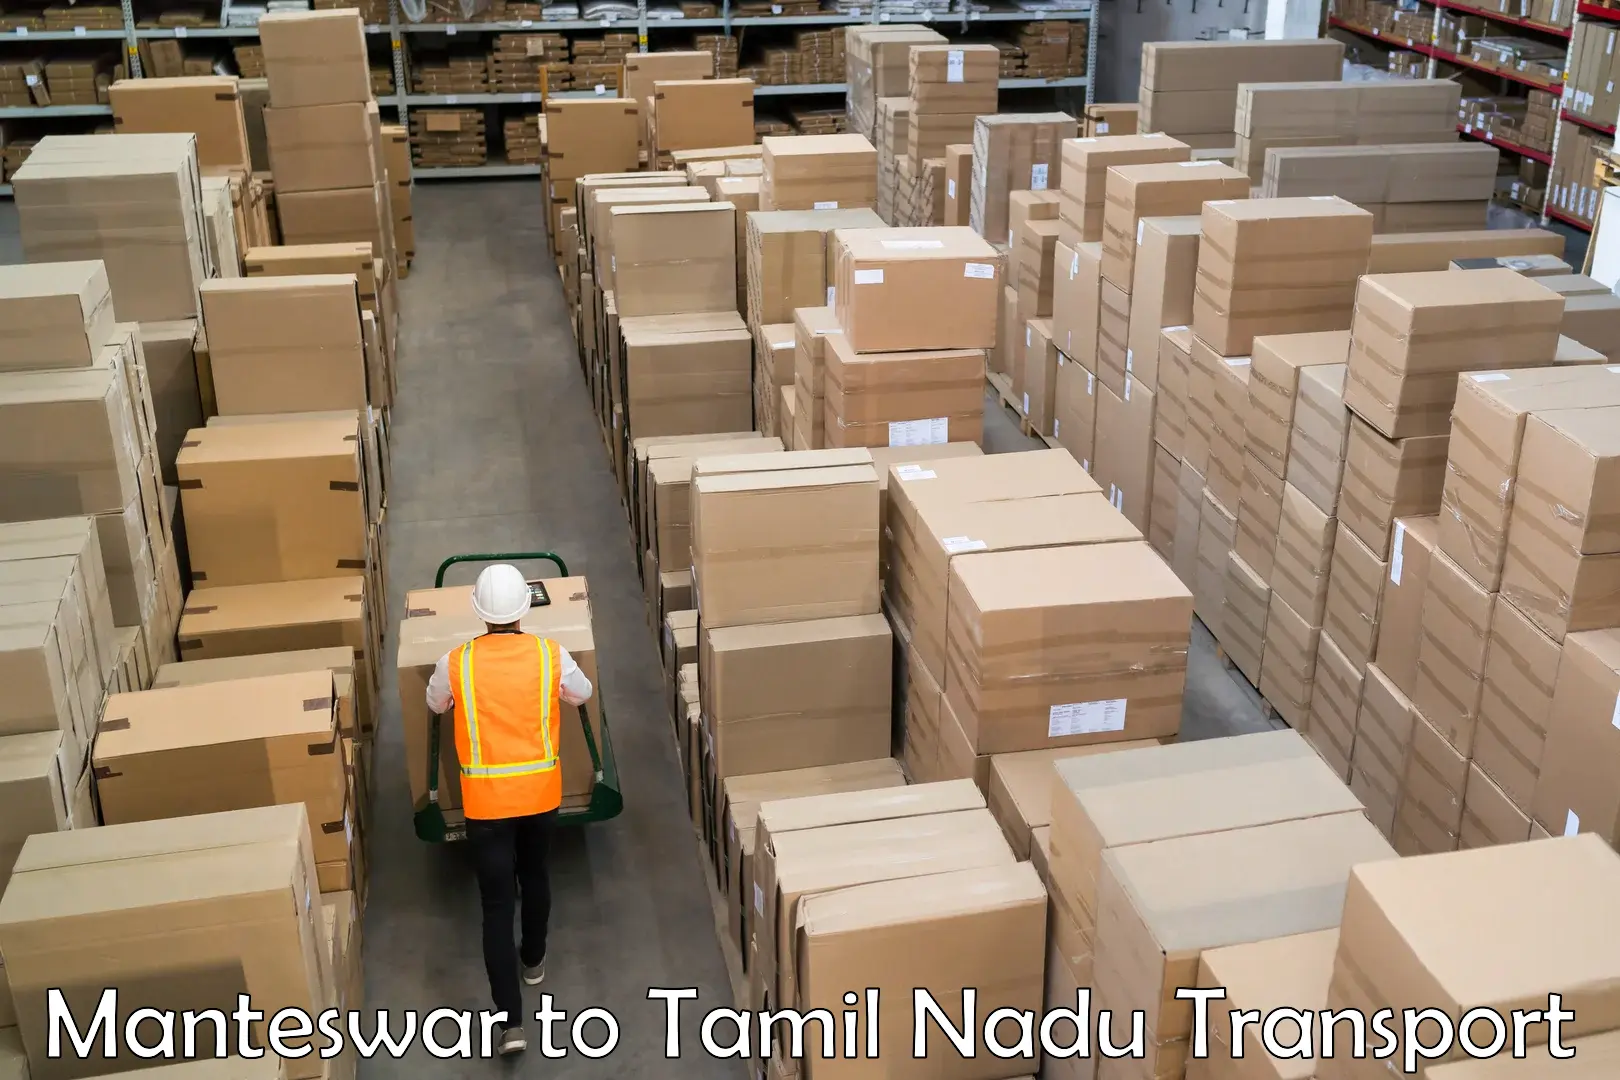 Part load transport service in India Manteswar to Anthiyur